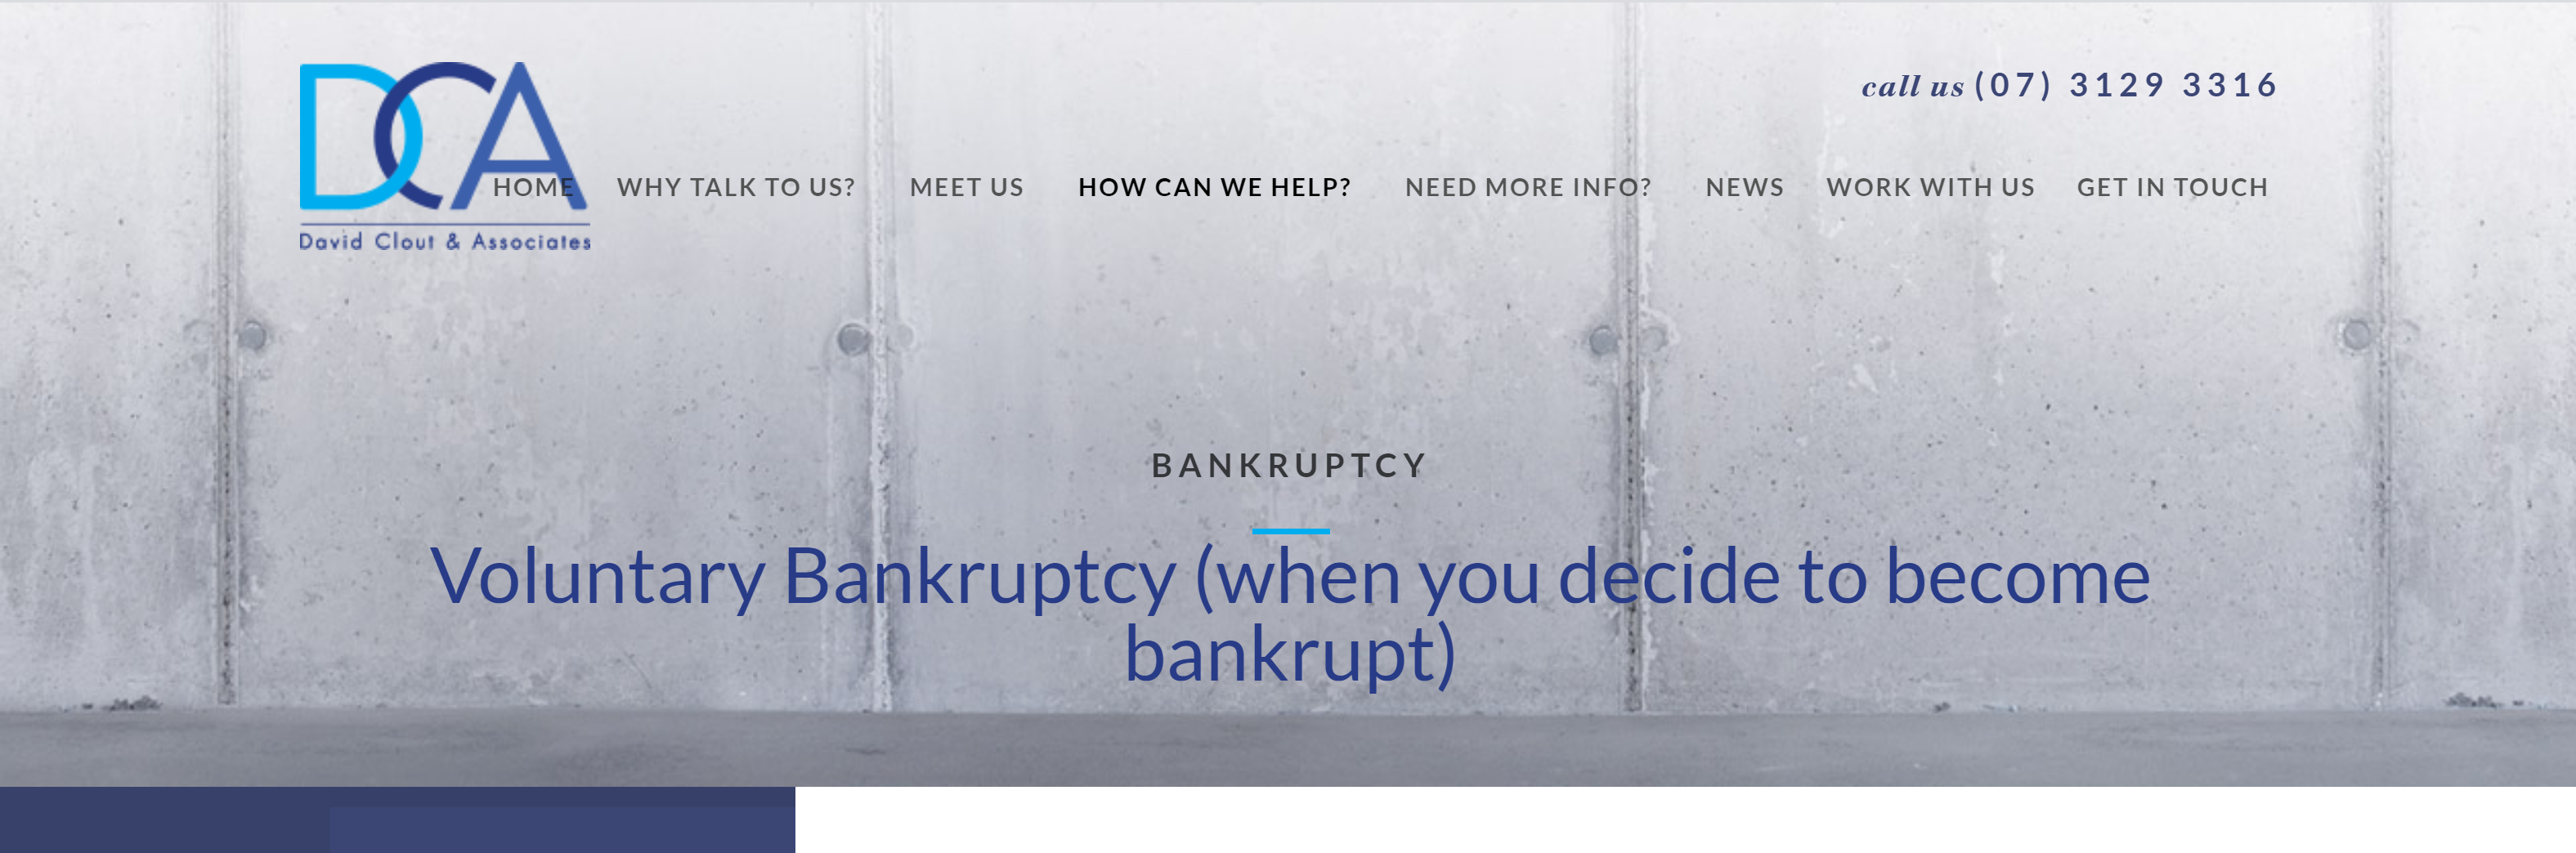 Voluntary Bankruptcy - What It Is And Process for Declaring Bankruptcy